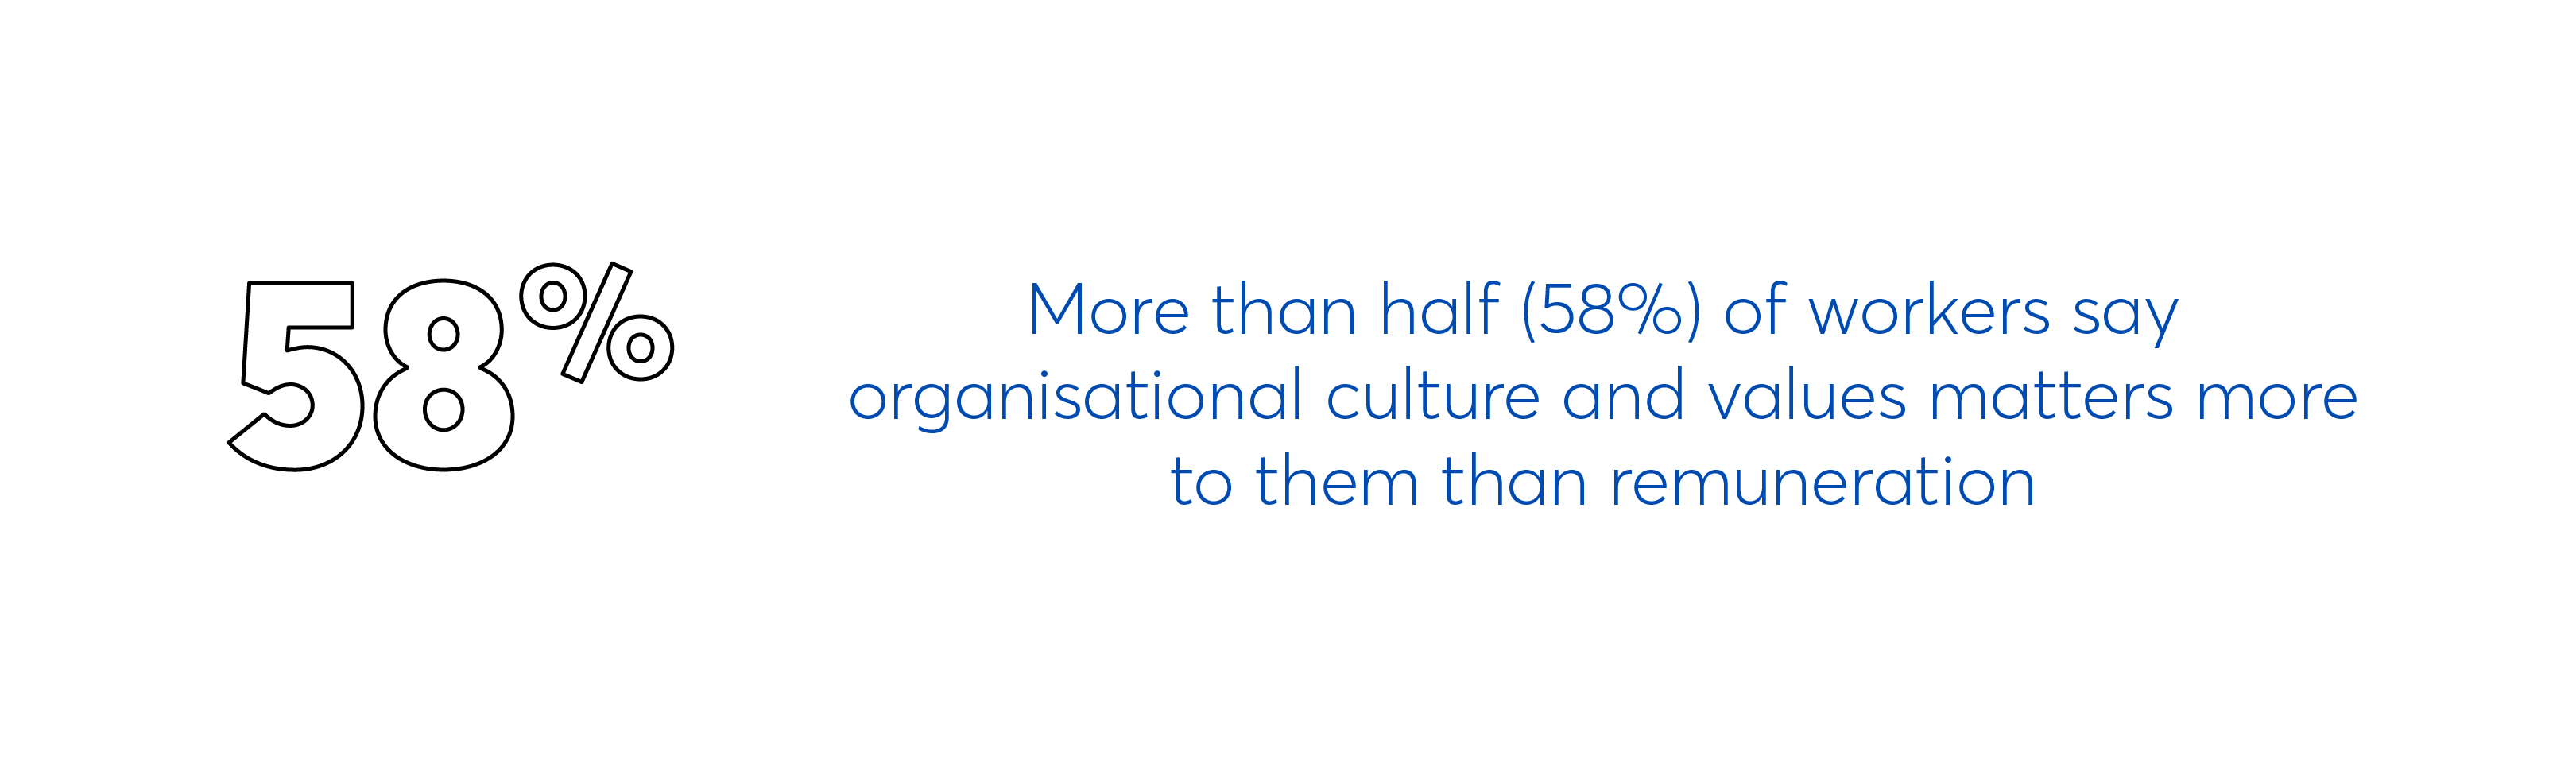 Culture and values more important than remuneration